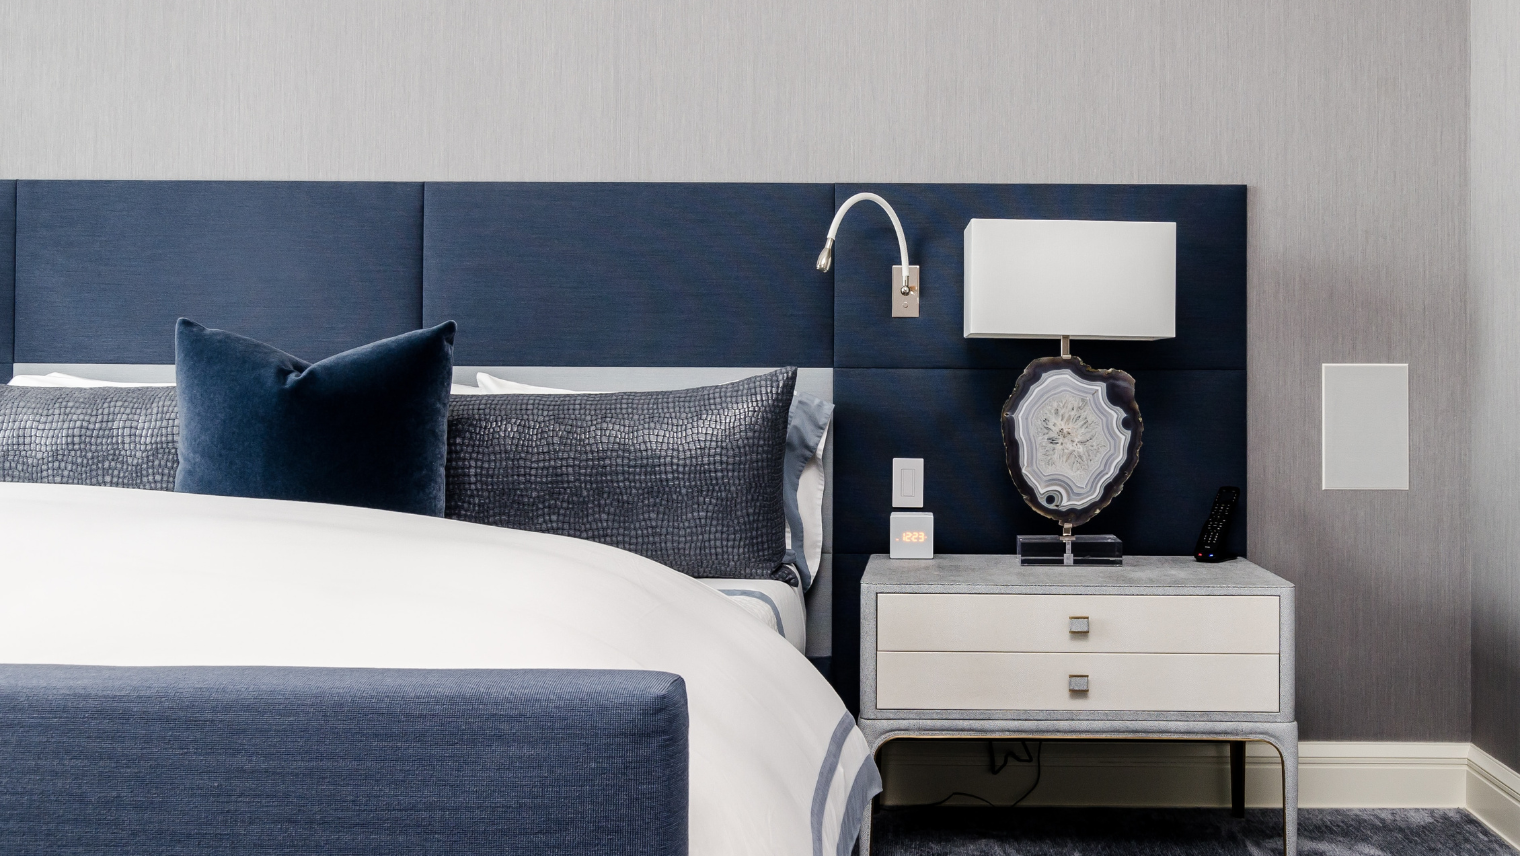 Image of a bed and bedside table at a hotel